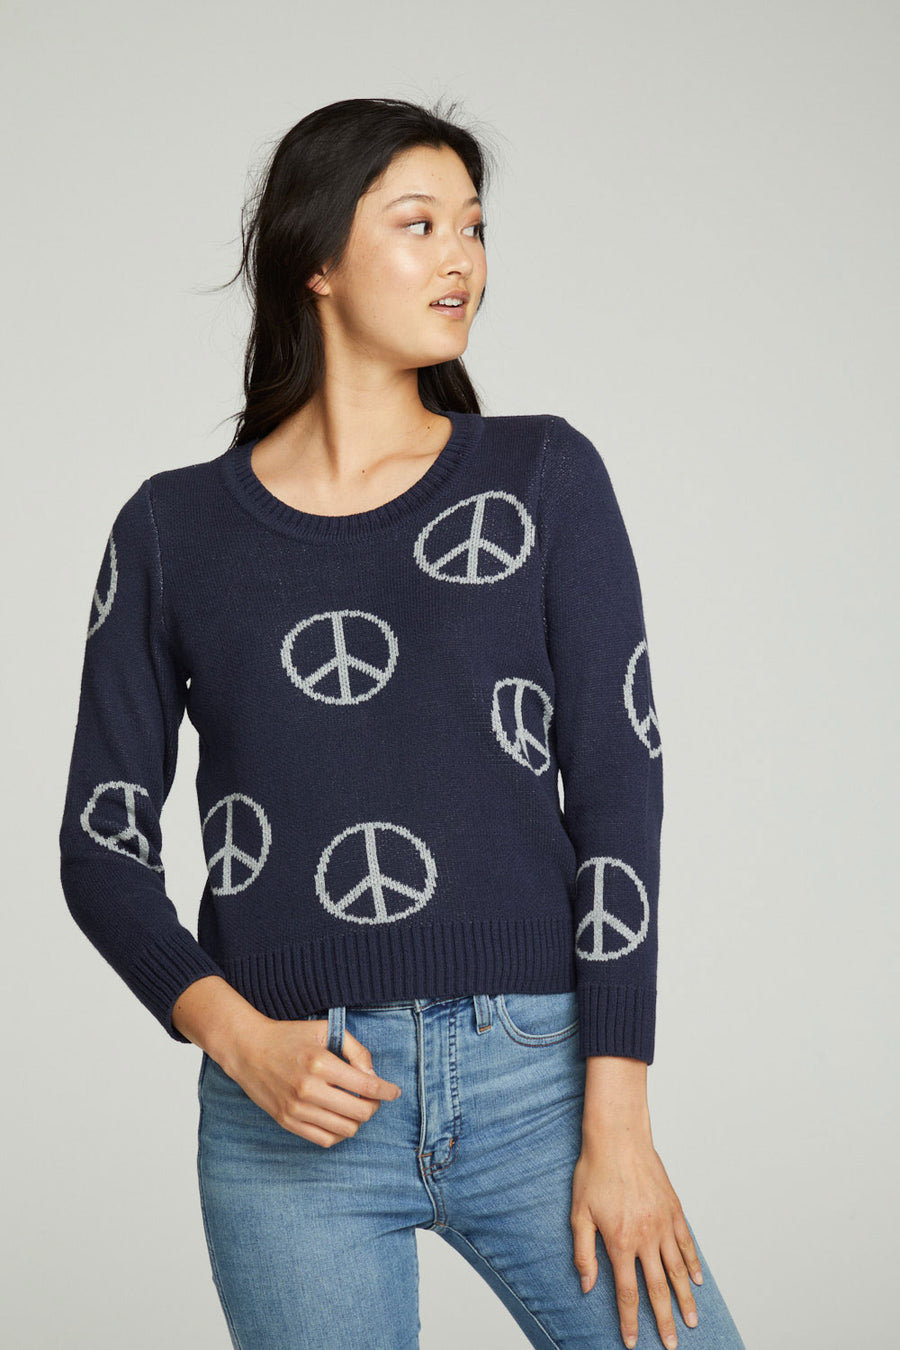 Cotton Blend Intarsia Sweater WOMENS chaserbrand